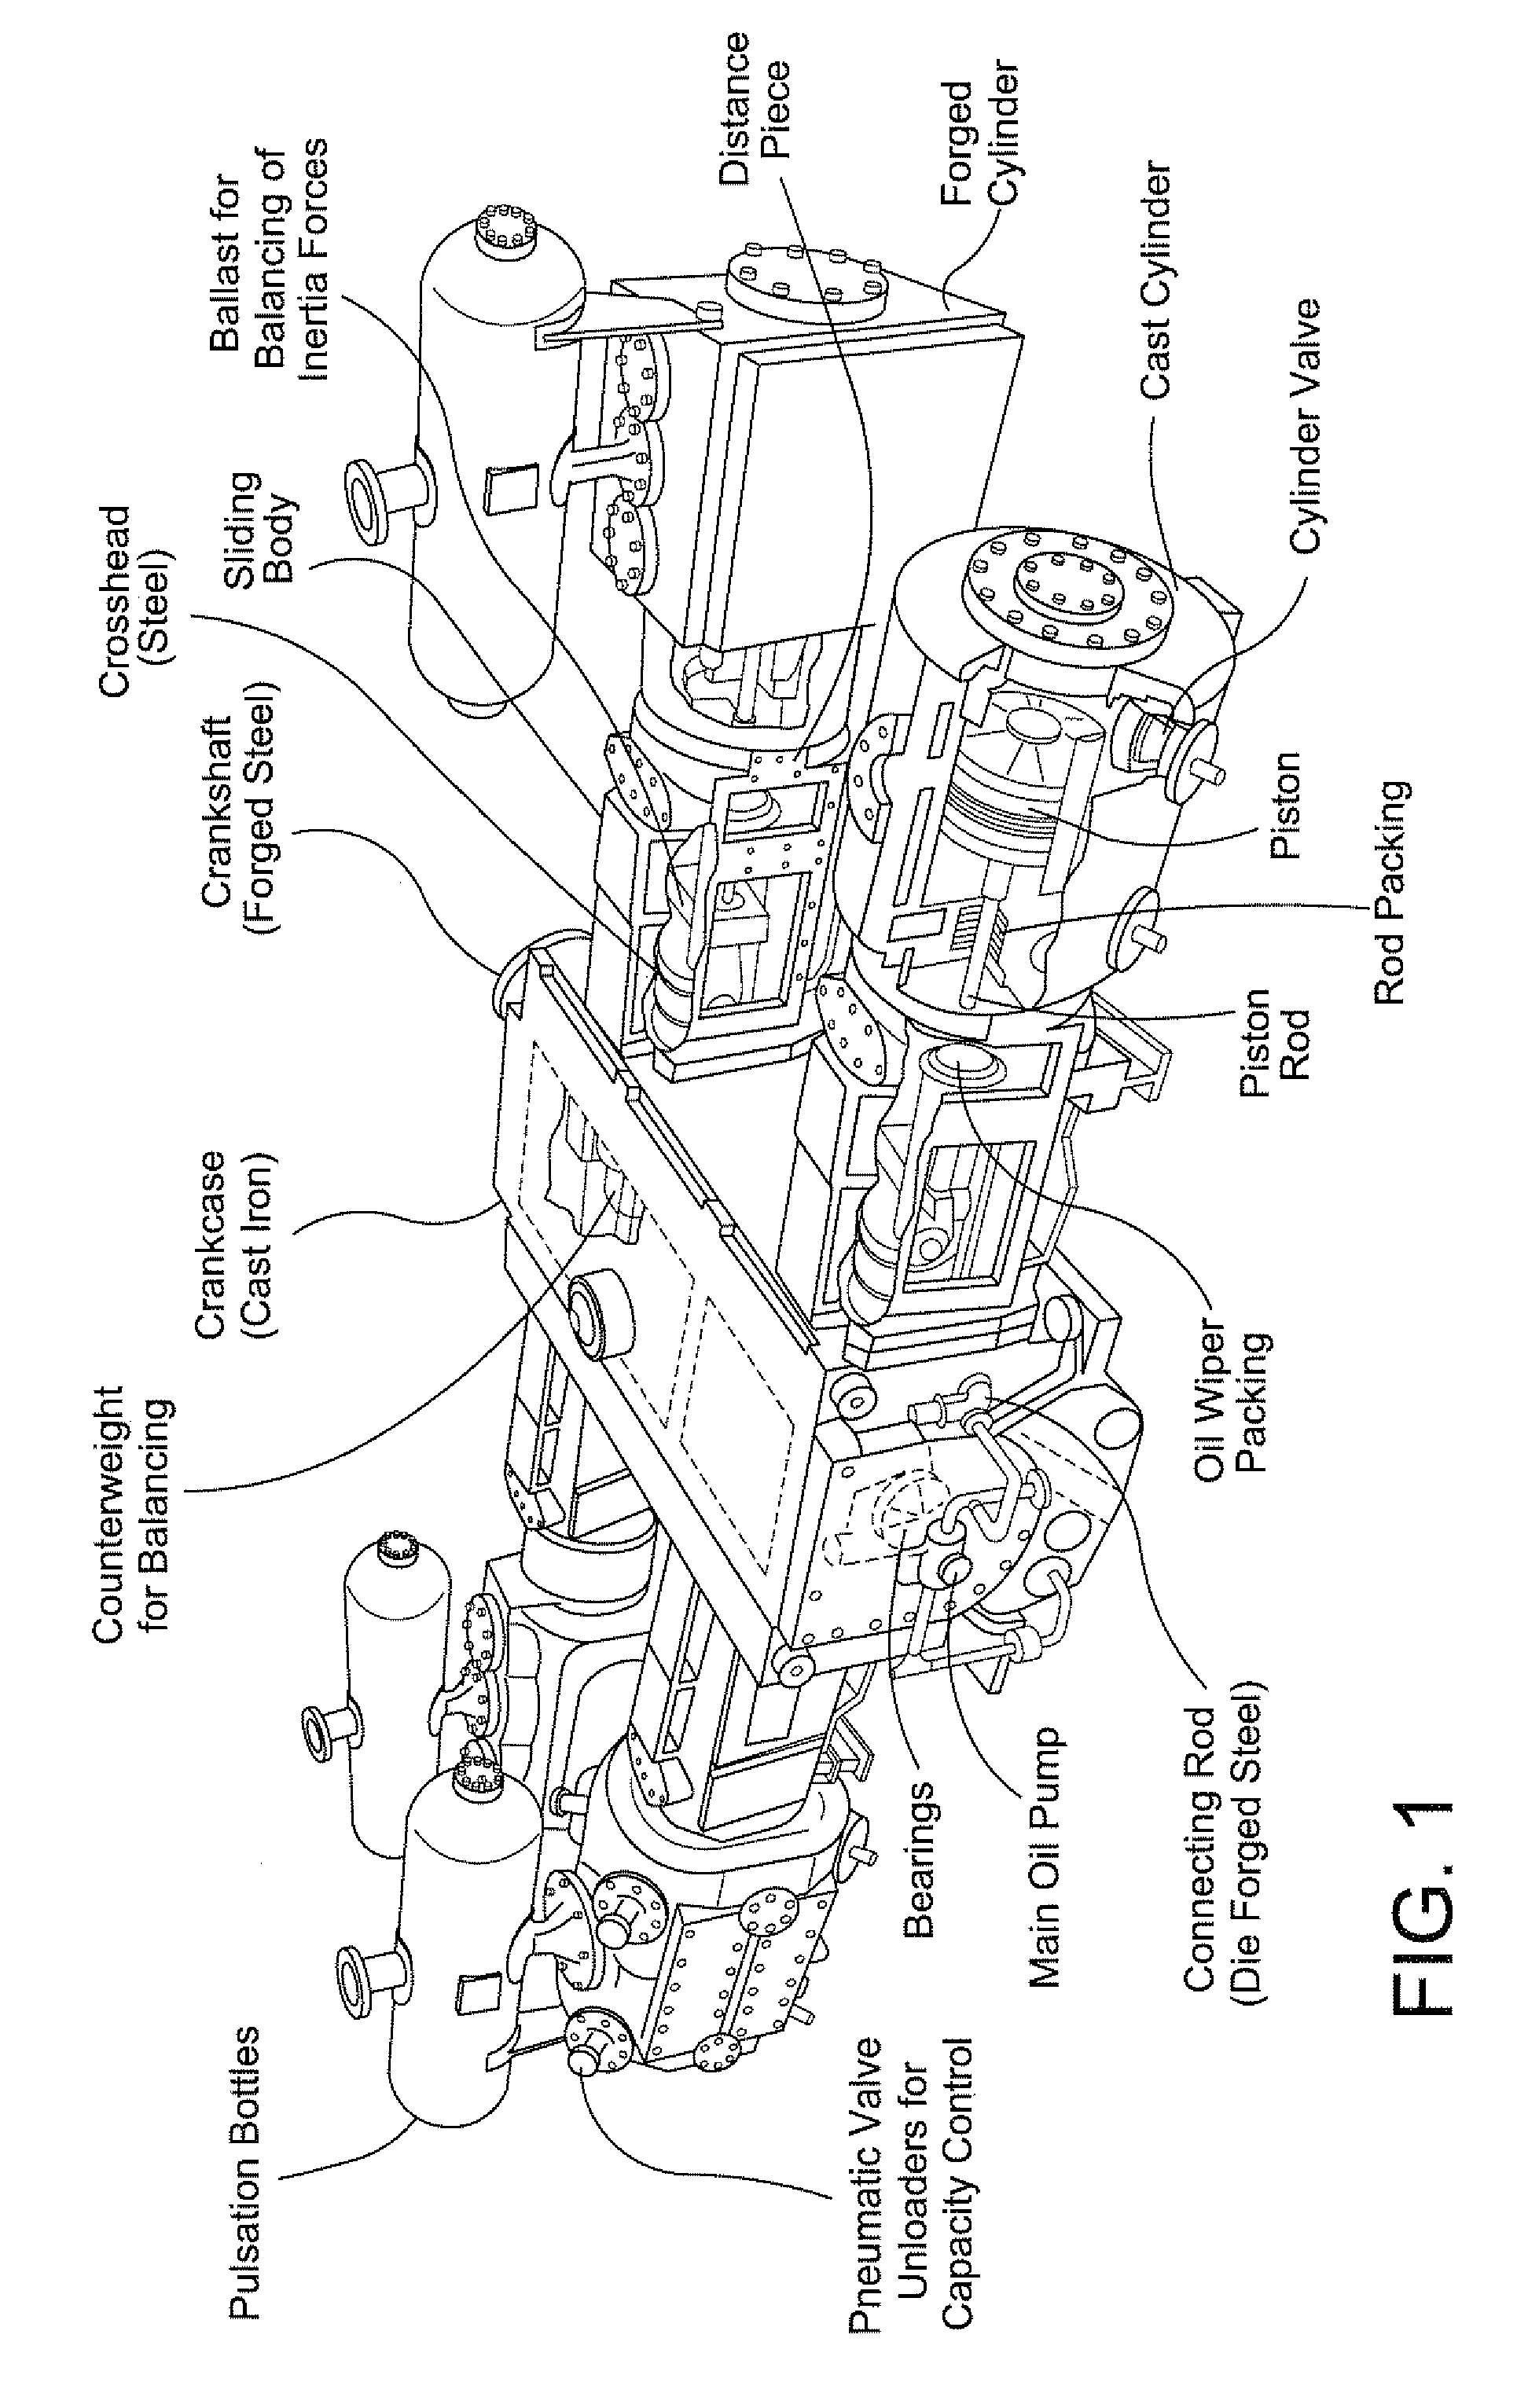 Method for prevention/detection of mechanical overload in a reciprocating gas compressor